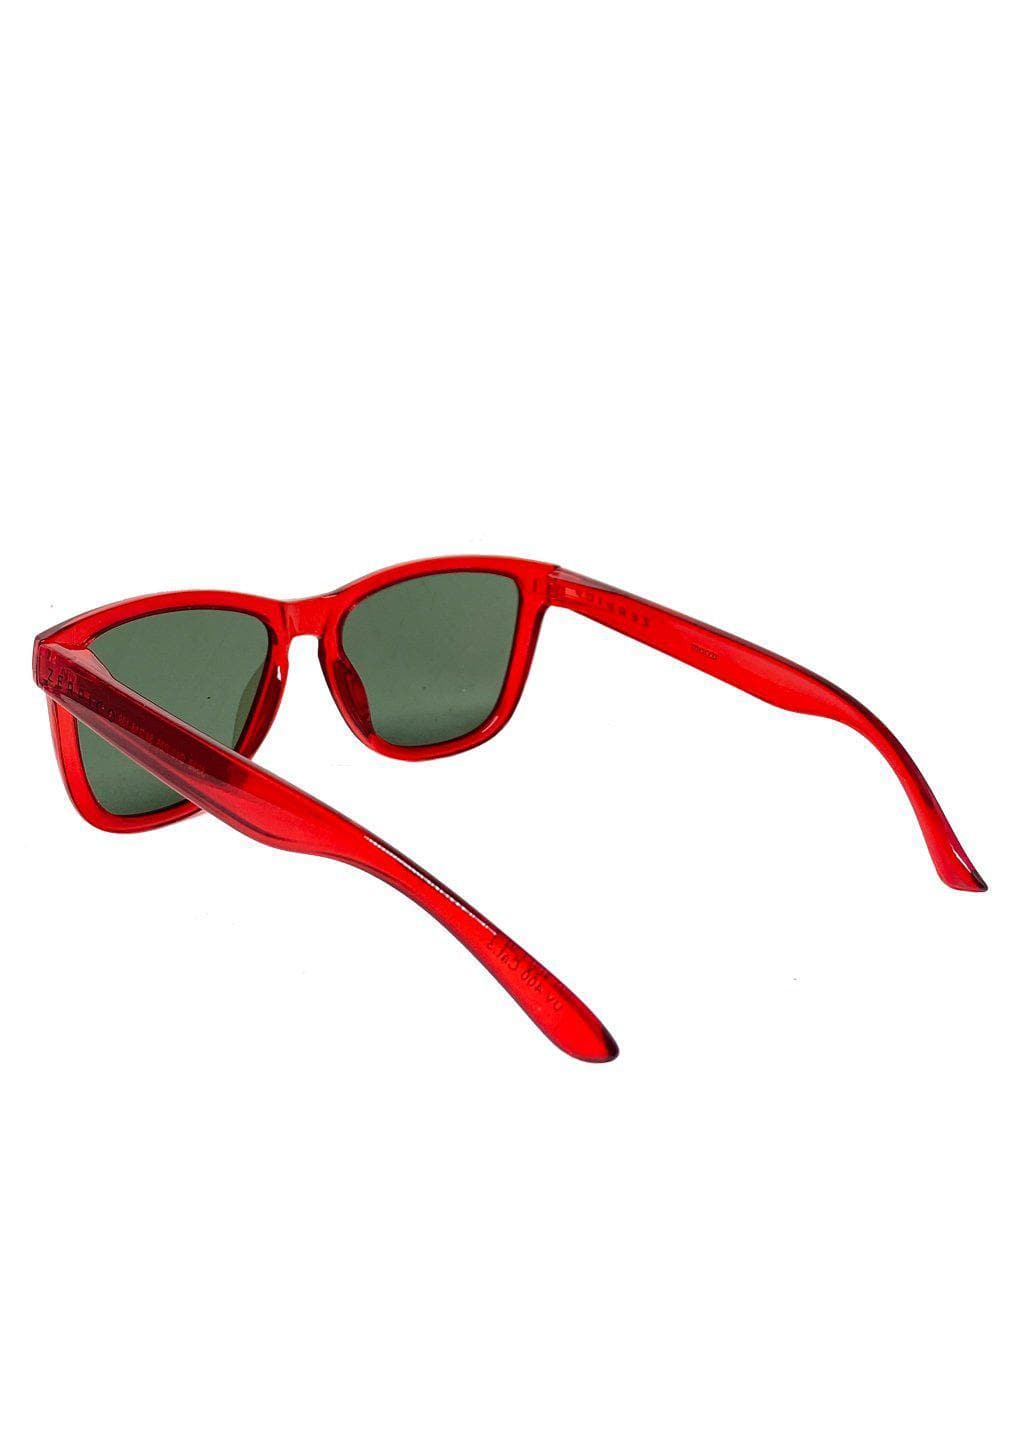 Our Mood V2 is an improved version of our last wayfarers. Plastic body for great quality and durabilty. This is Deco with a red transparent frame and light green lenses. Studio shoot from the back.